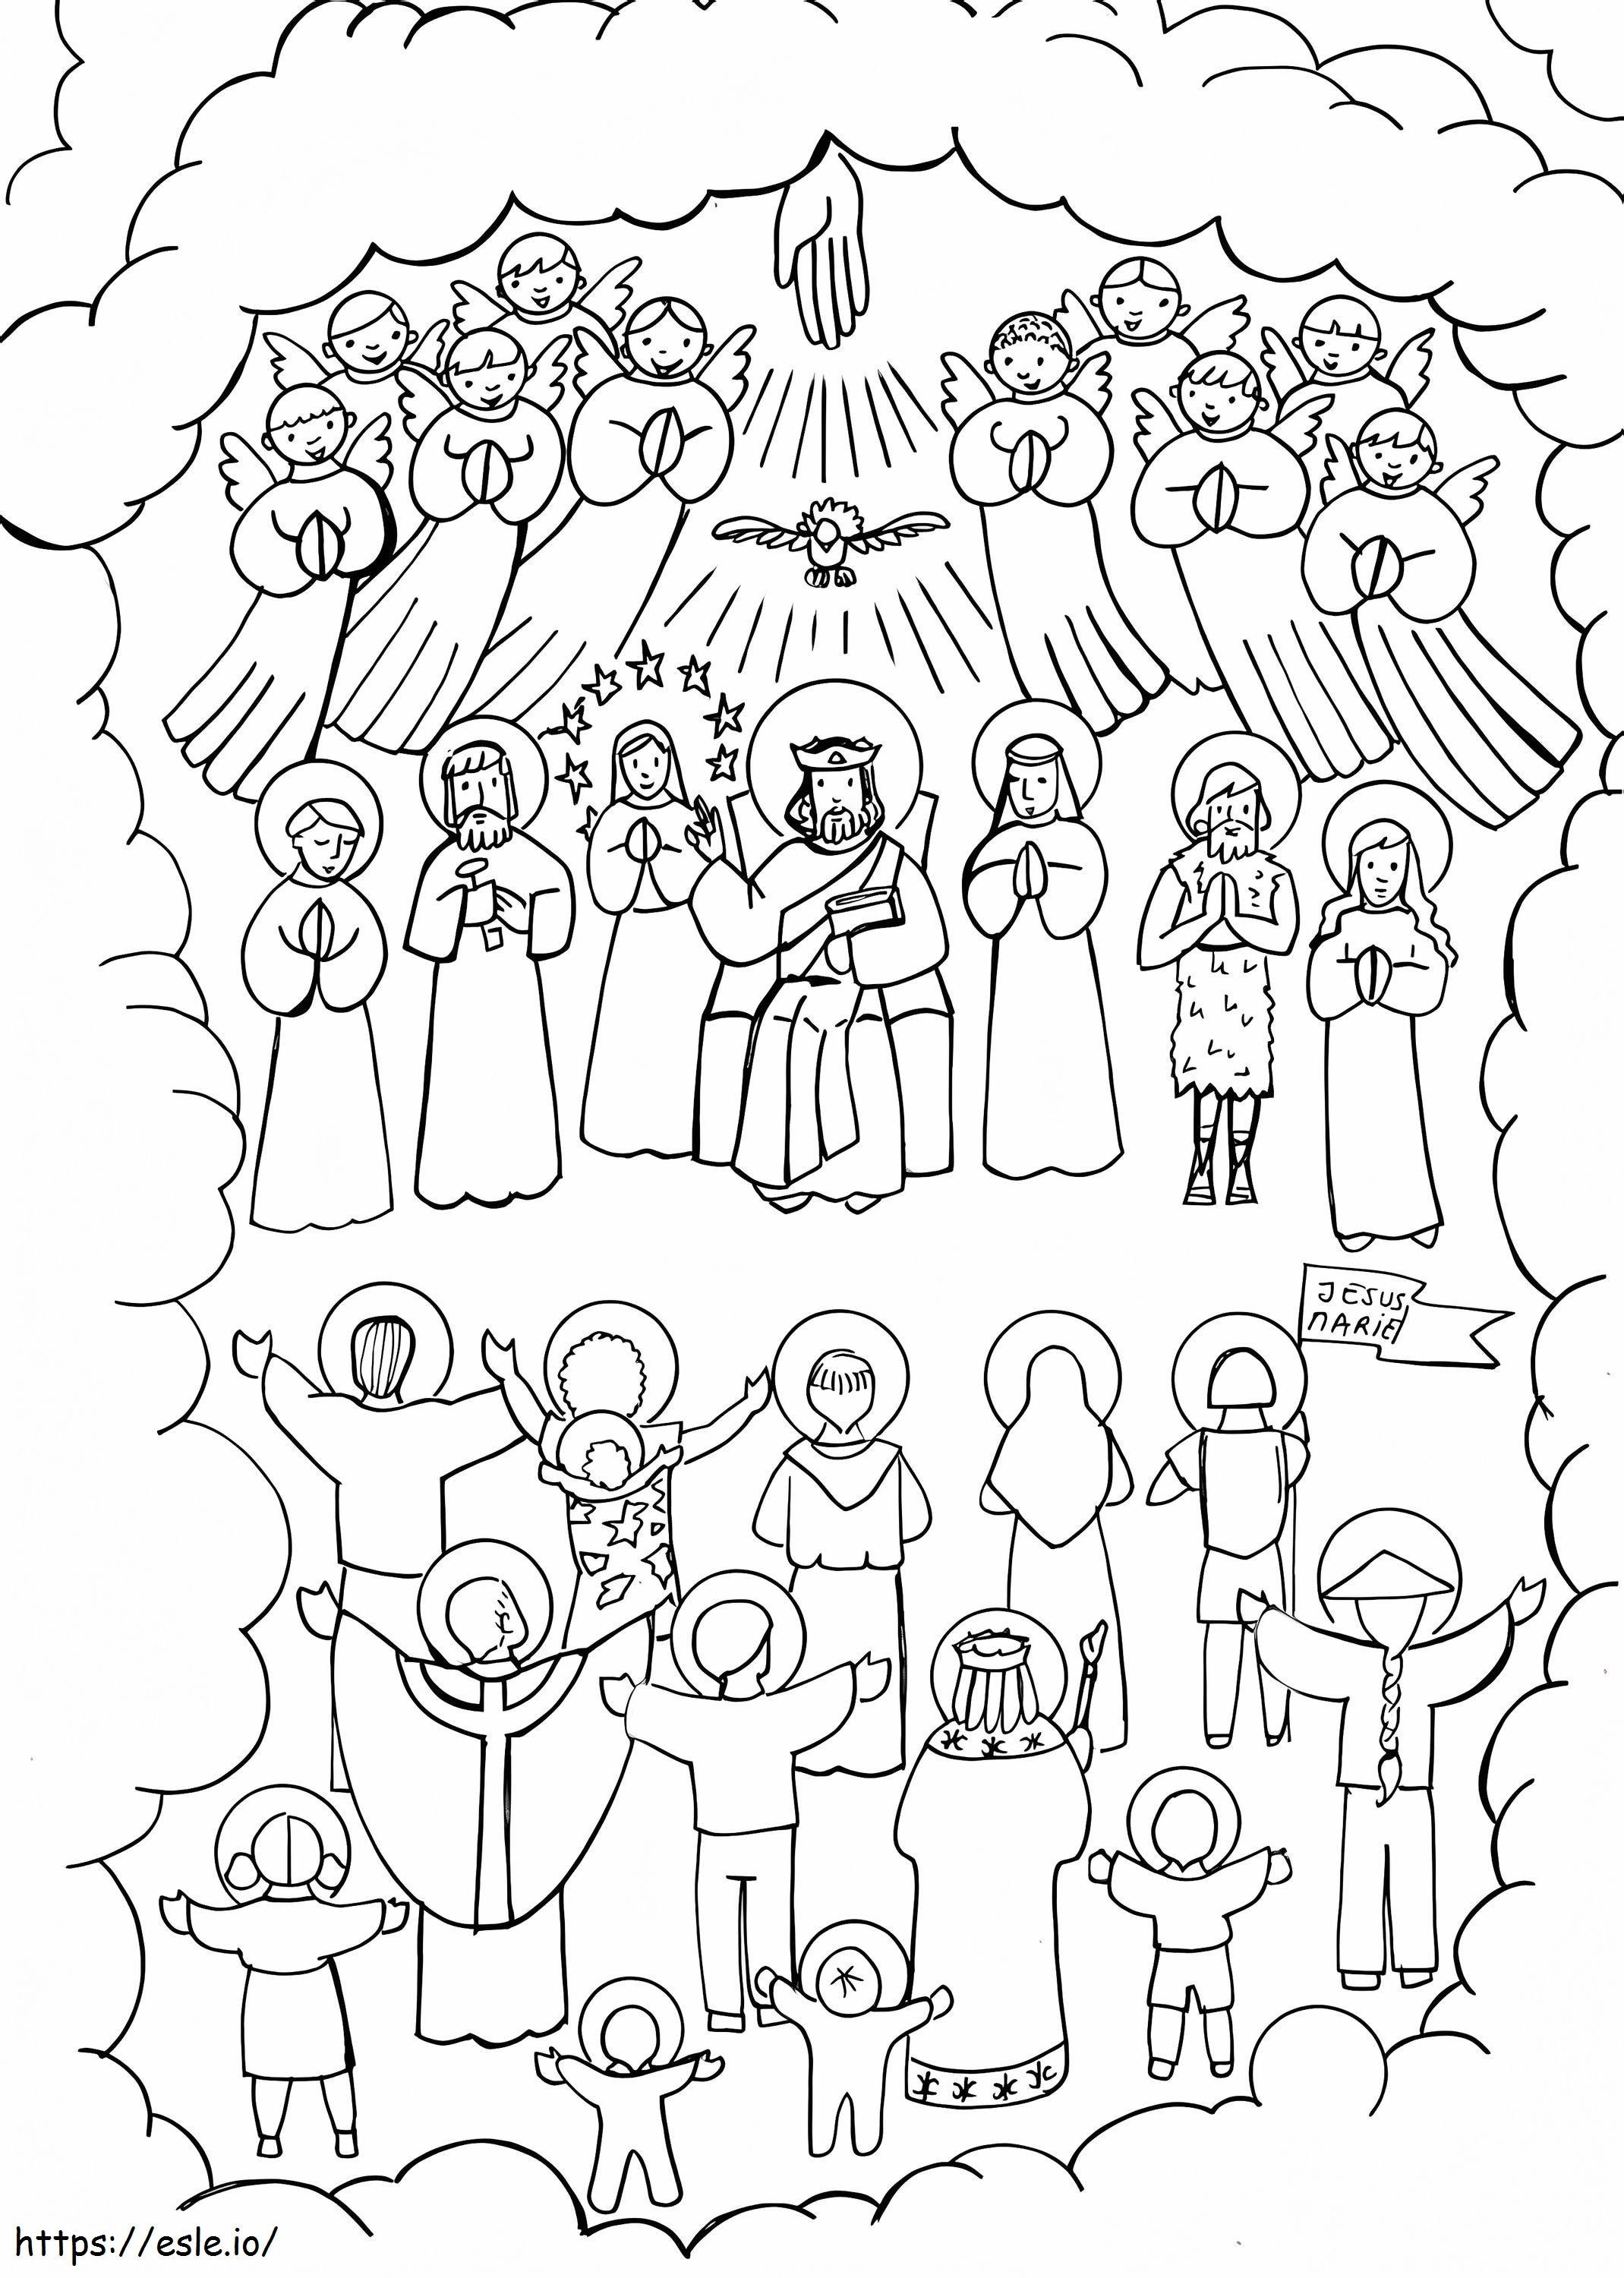 All Saints Day 3 coloring page